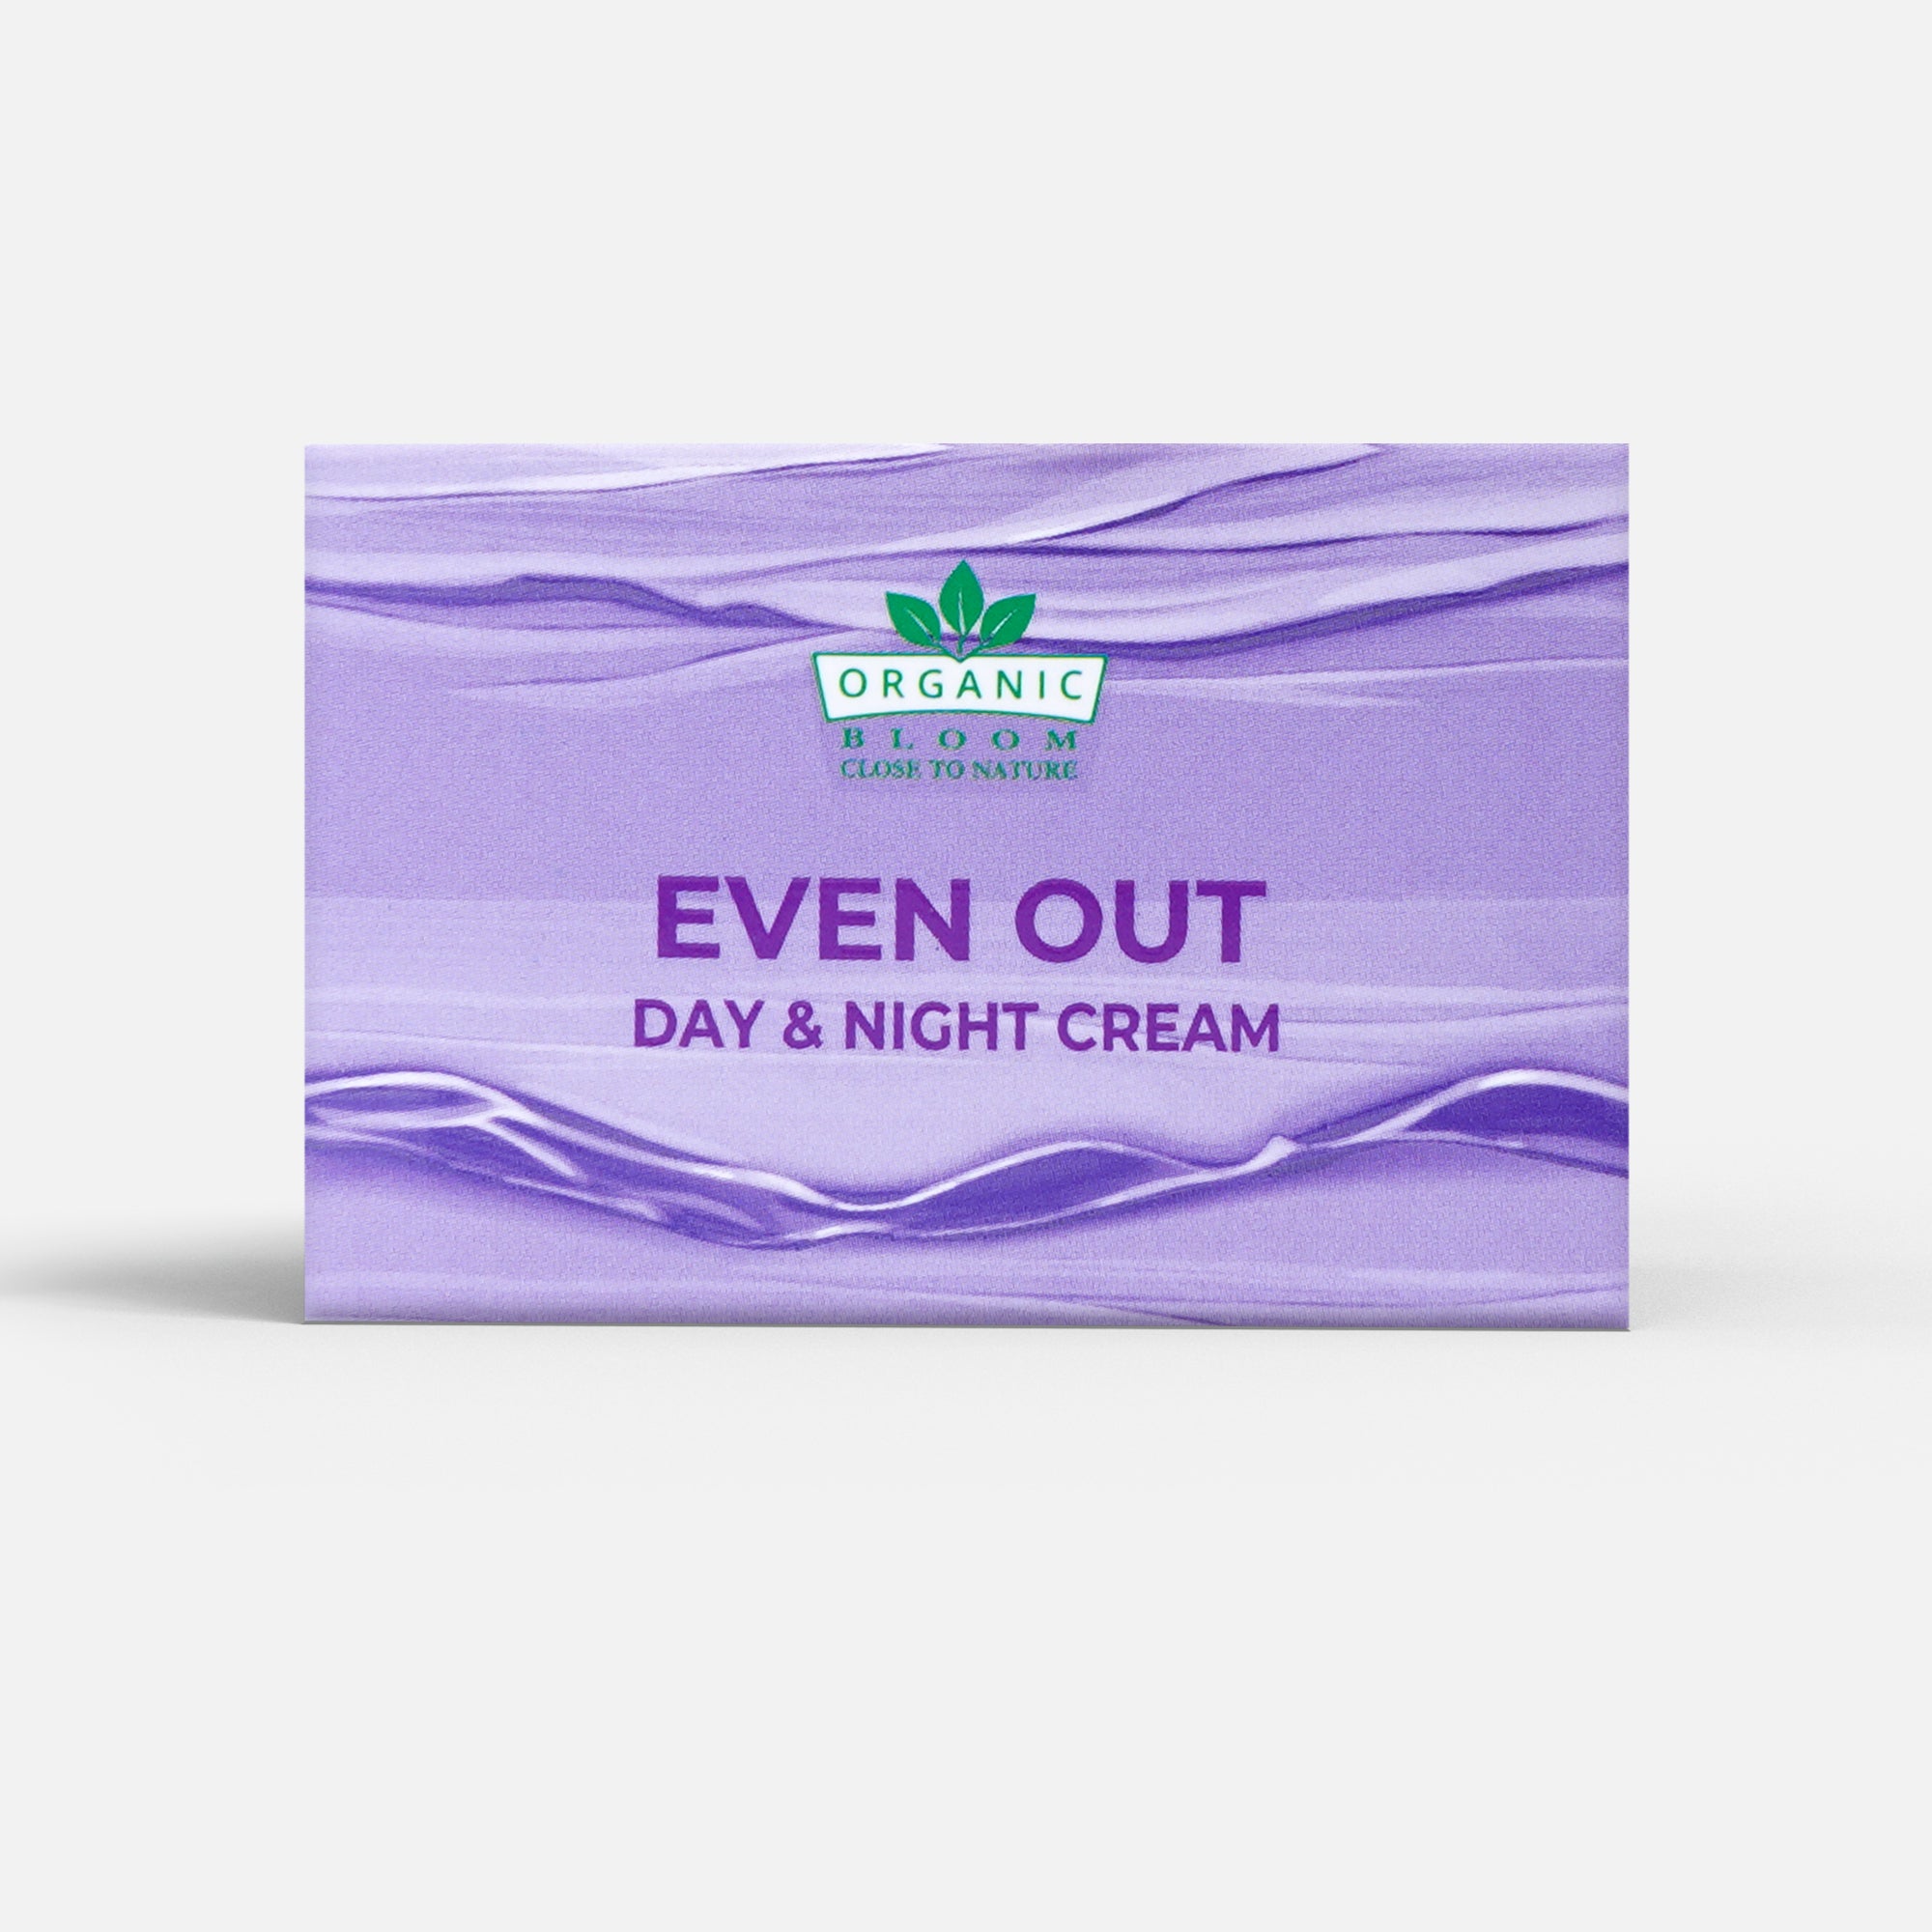 EVEN OUT DAY & NIGHT CREAM